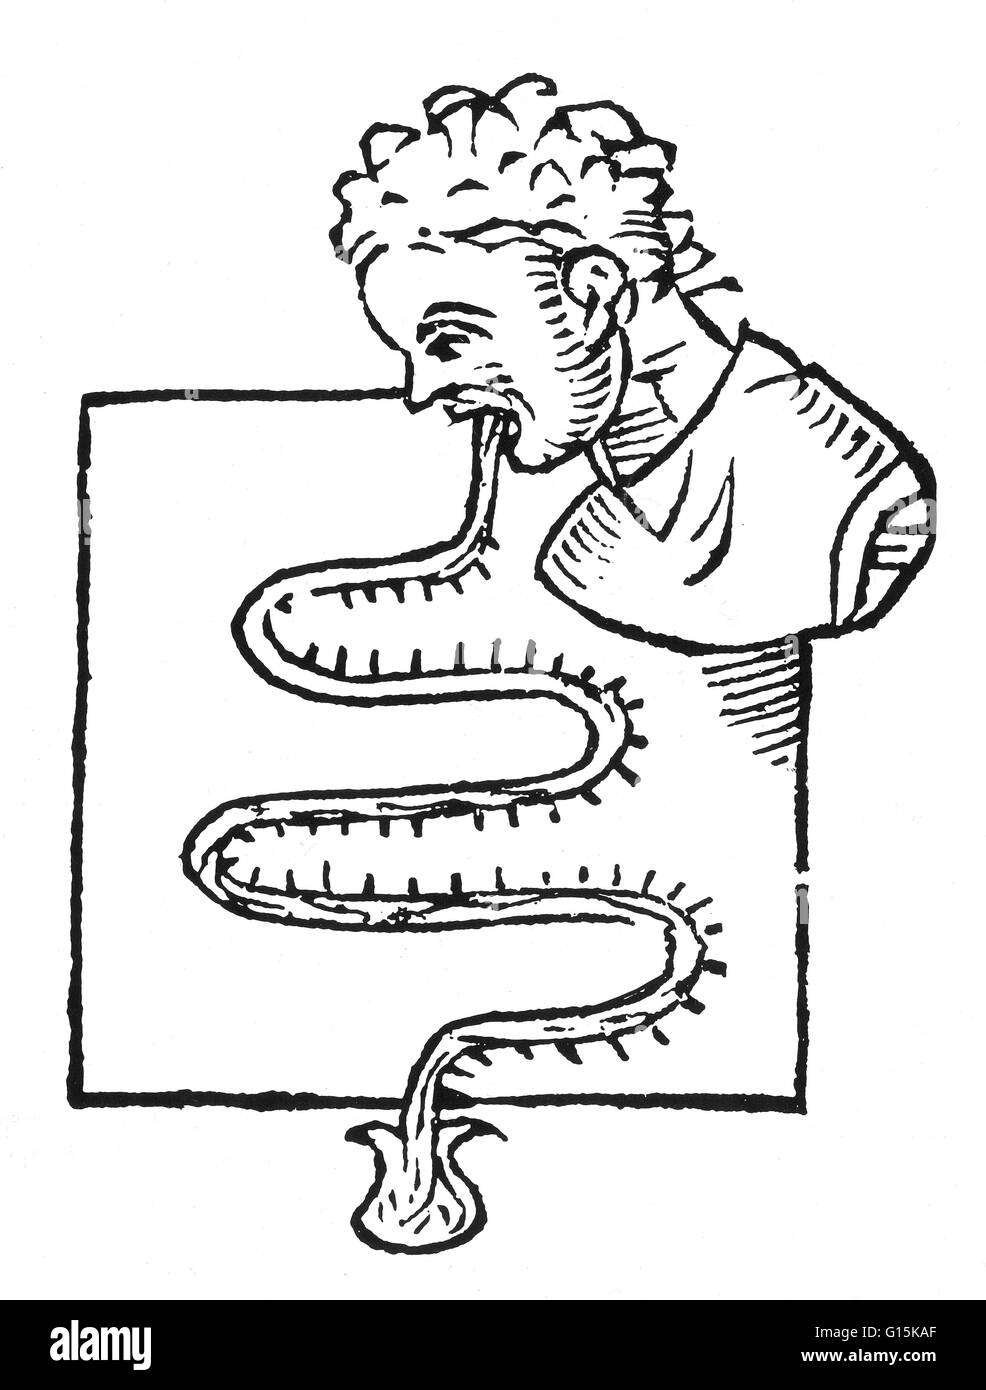 Earliest known illustration of an oral thermometer, drawn by its inventor, the Italian physician Sanctorius Sanctorius (1561-1636), in 1625.  The thermometer was made of glass tubing and the vial at the bottom contained mercury.  To get a reading, the pat Stock Photo